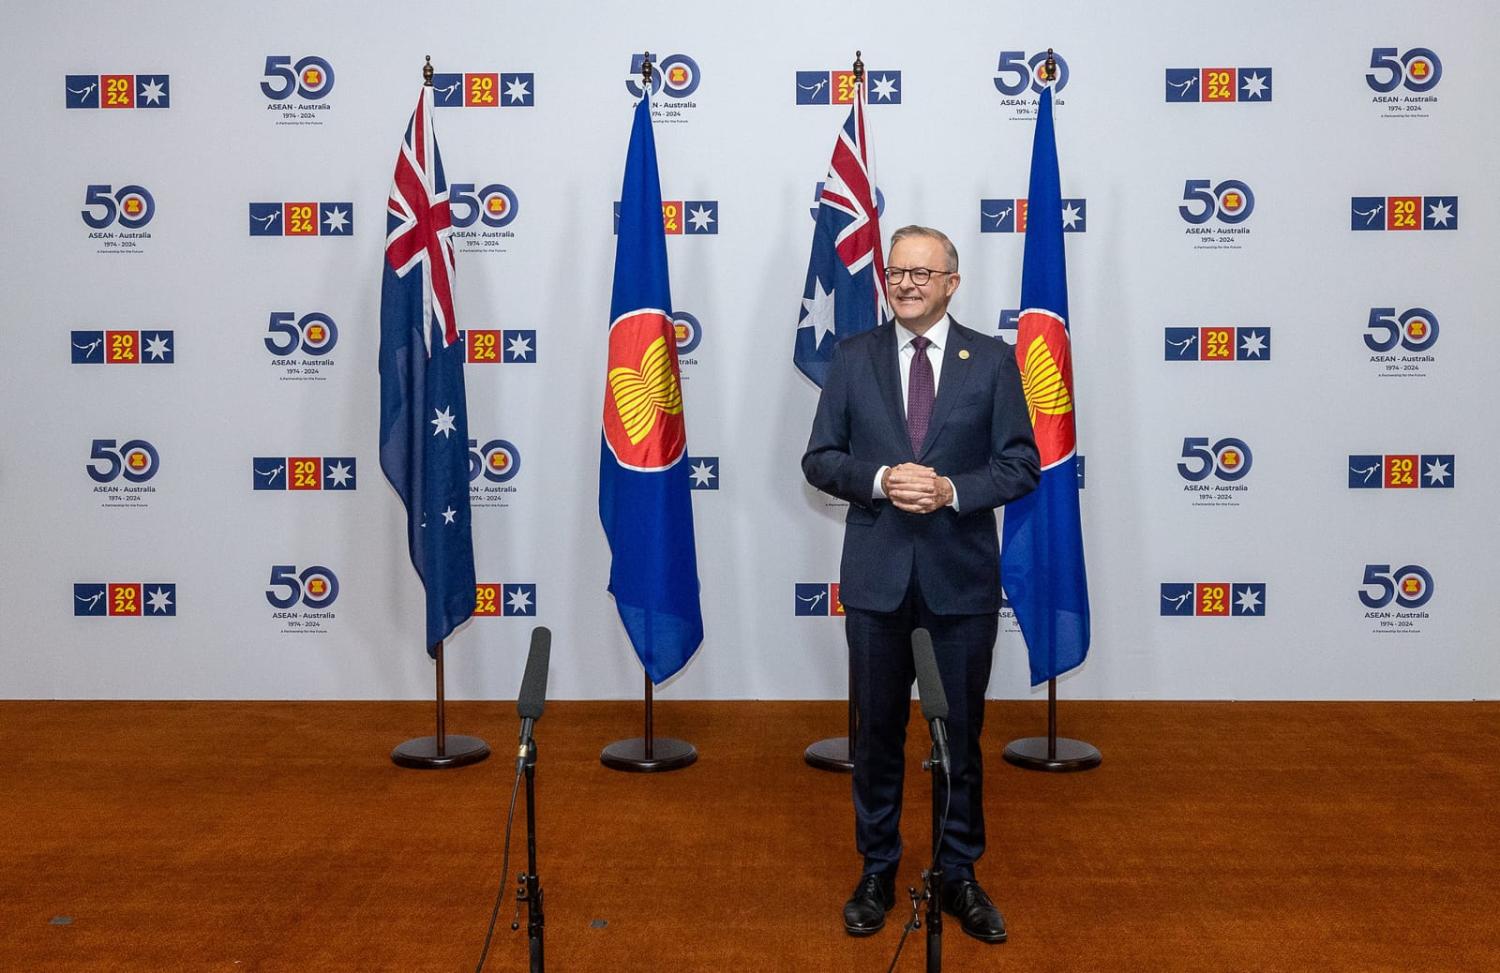 Prime Minister Anthony Albanese waiting to shake hands with ASEAN Secretary General Kao Kim Hourn (Wayne Taylor/ASEAN-Australia Special Summit)